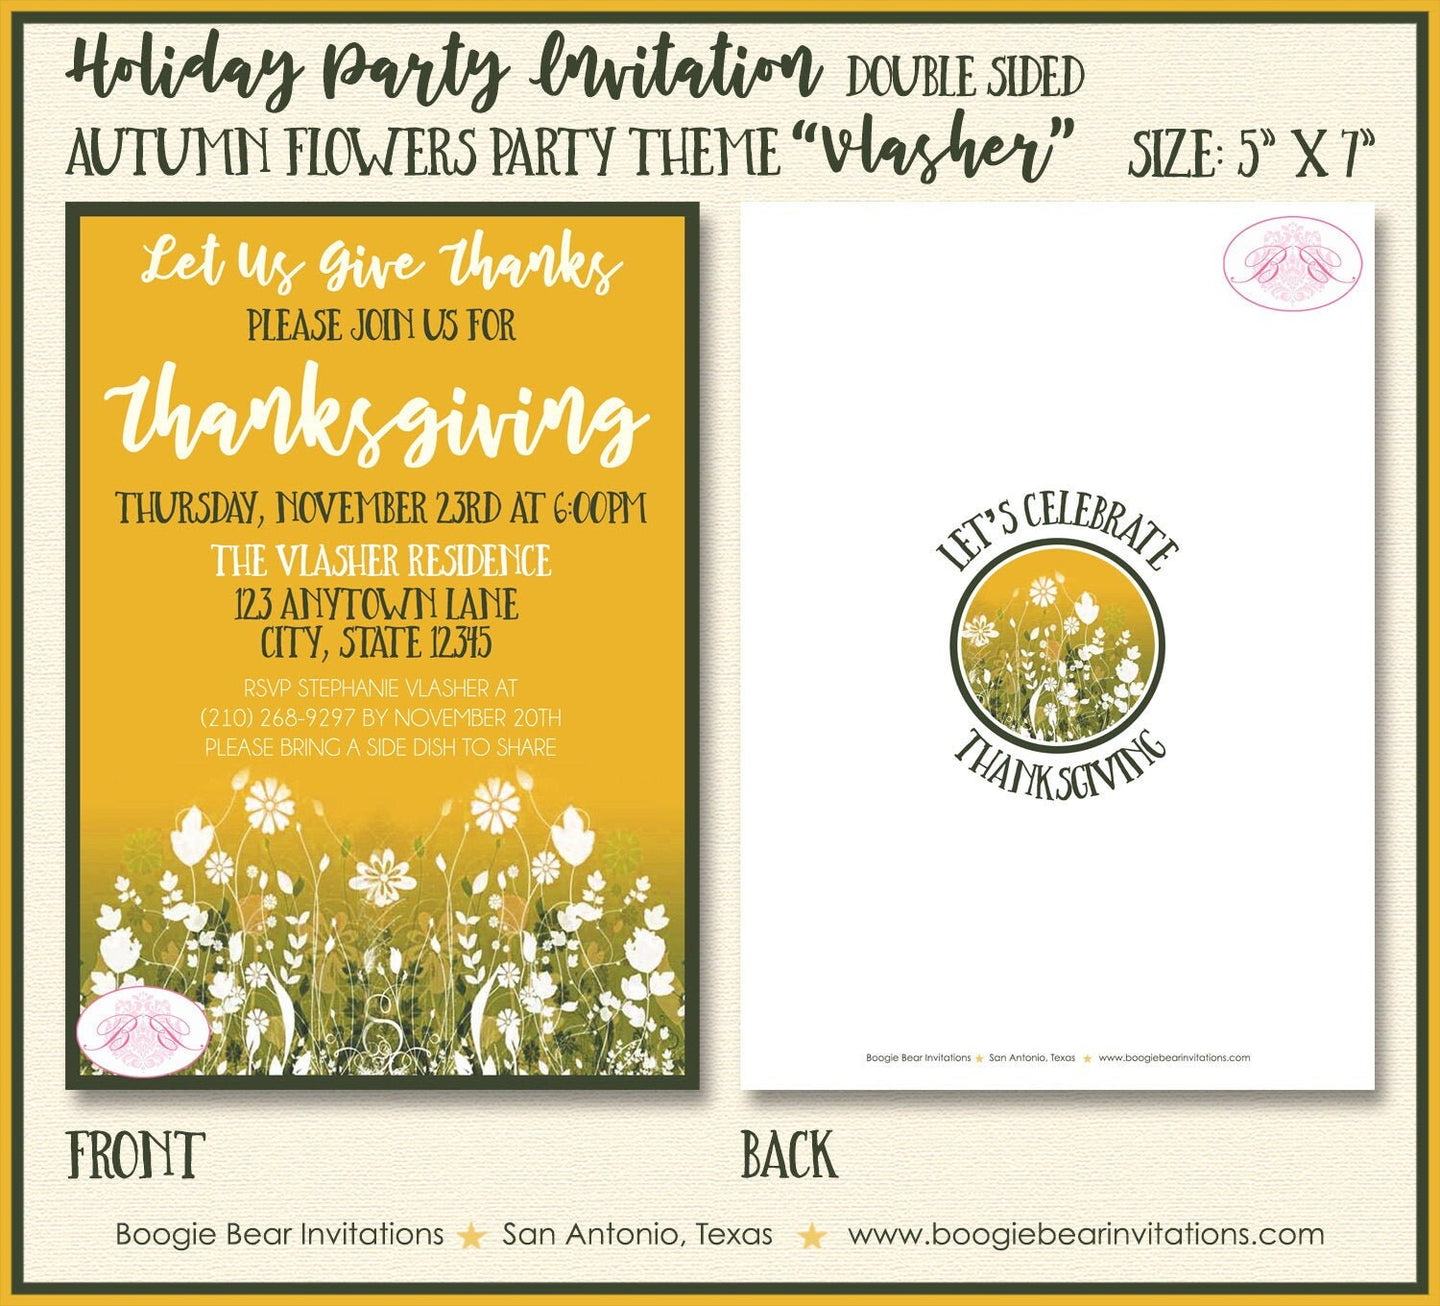 Autumn Flowers Party Invitation Dinner Fall Floral Harvest Thanksgiving Boogie Bear Invitations Vlasher Theme Paperless Printable Printed